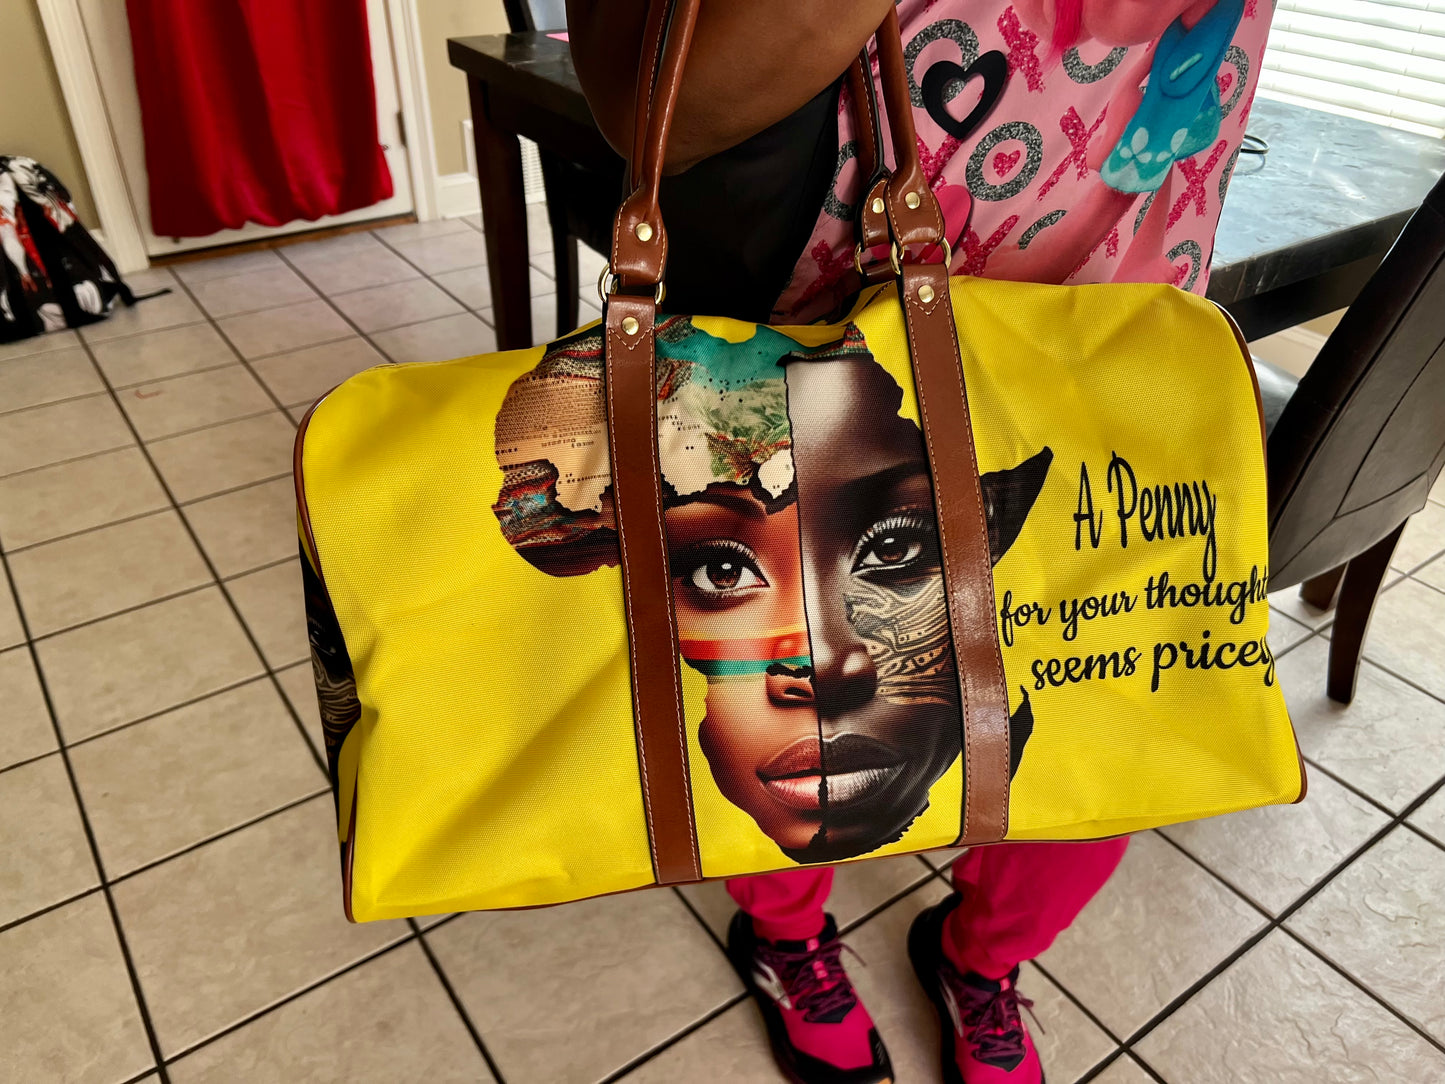 A penny for your thoughts….seems pricey tote bag